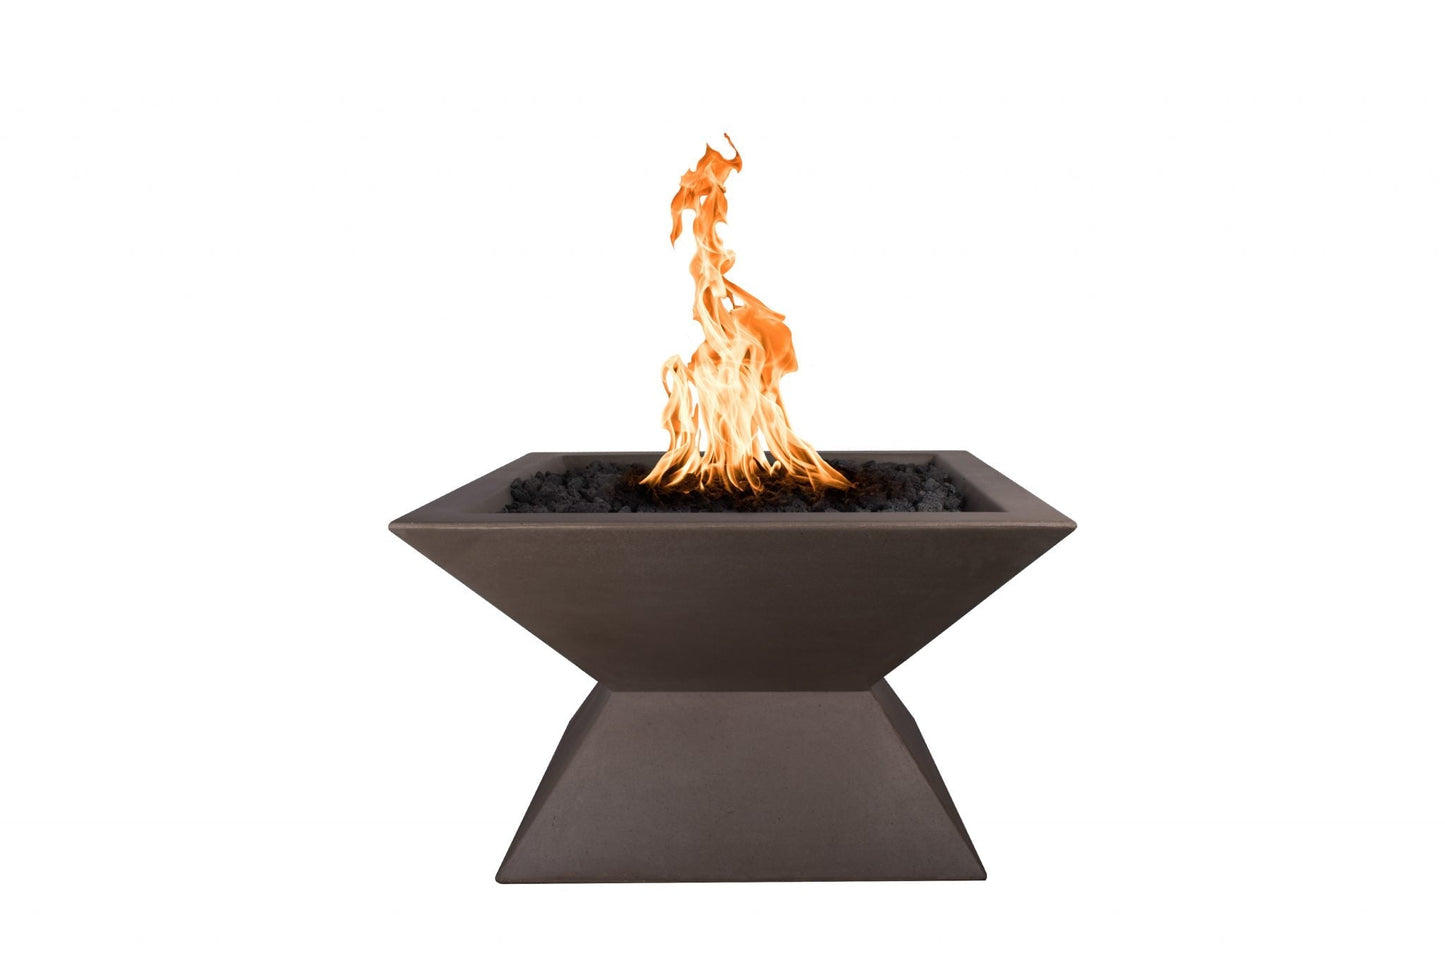 The Outdoor Plus Square Uxmal 30" Metallic Pearl GFRC Concrete Liquid Propane Fire Pit with Match Lit with Flame Sense Ignition